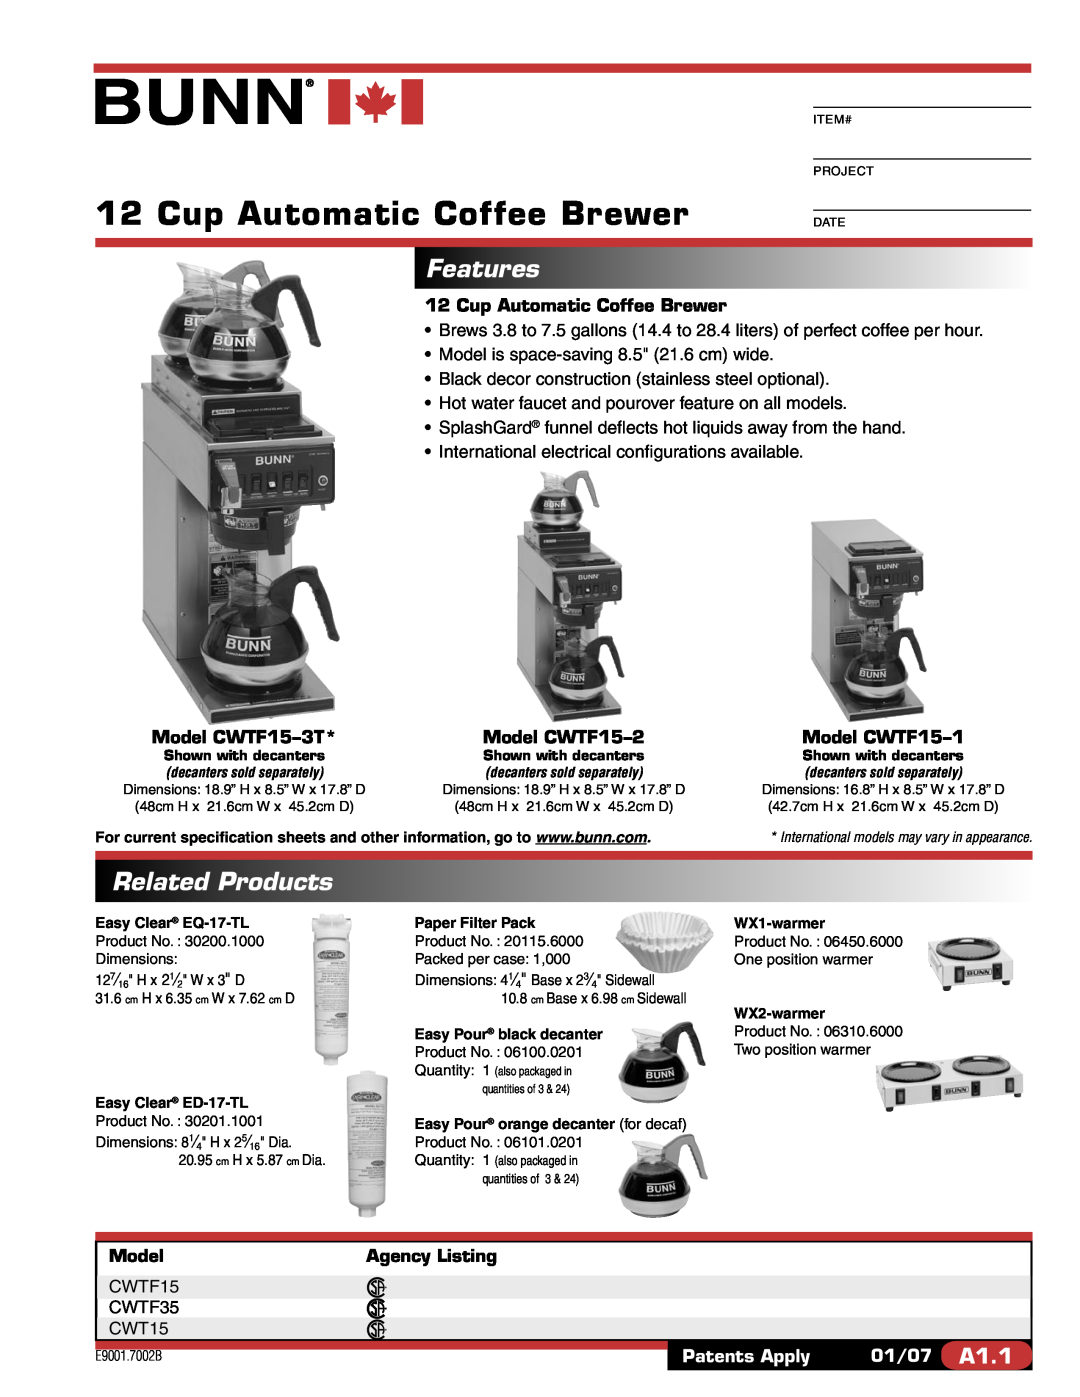 Bunn CWTF153T specifications Features, Related Products, Cup Automatic Coffee Brewer, Model CWTF15-3T, Model CWTF15-2 